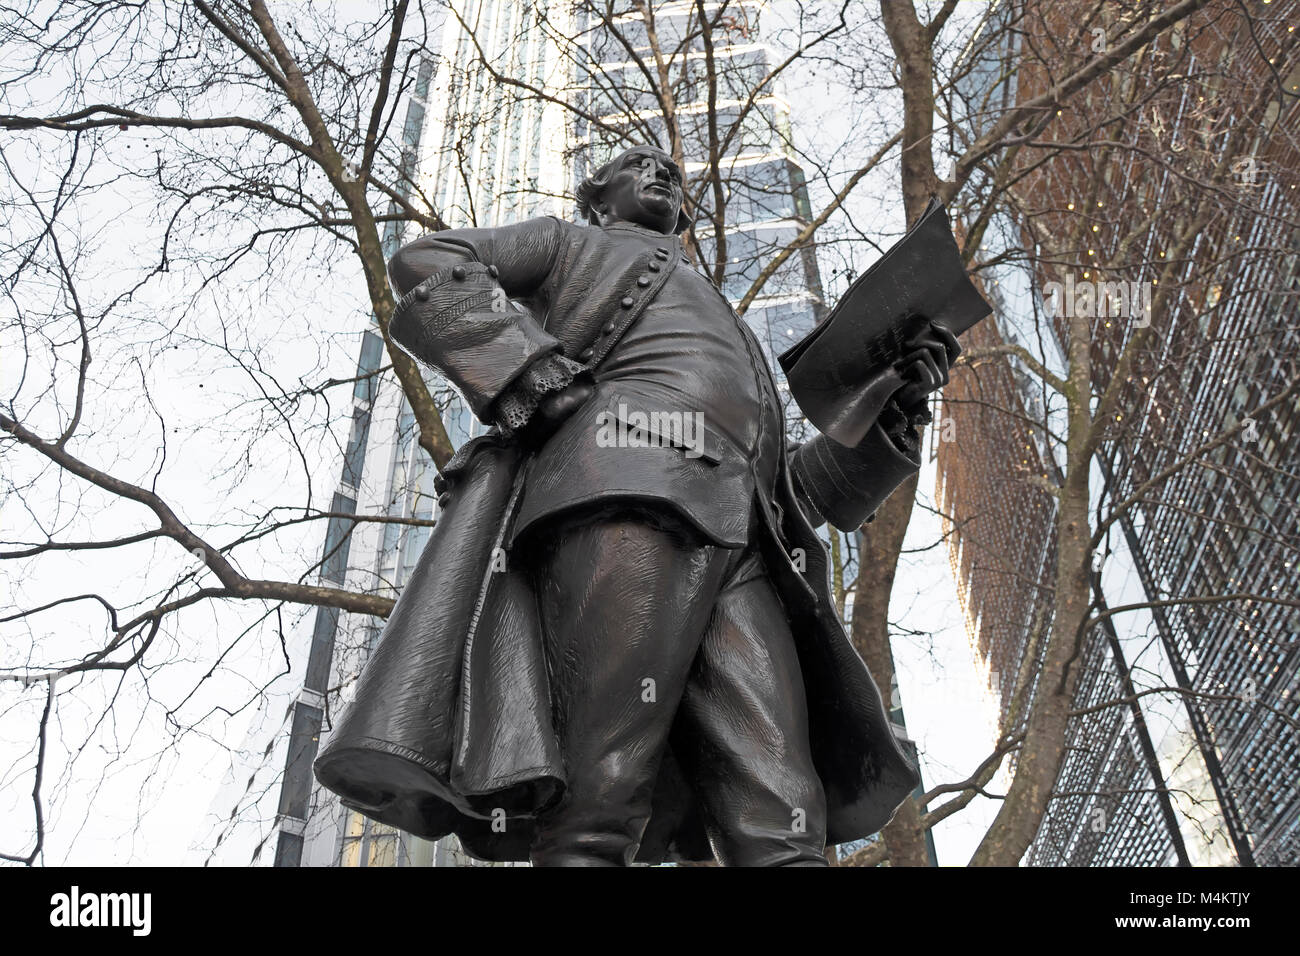 the 1988 bronze statue of the 18th century radical journalist and politician john wilkes by sculptor james butler, new fetter lane, london, england Stock Photo